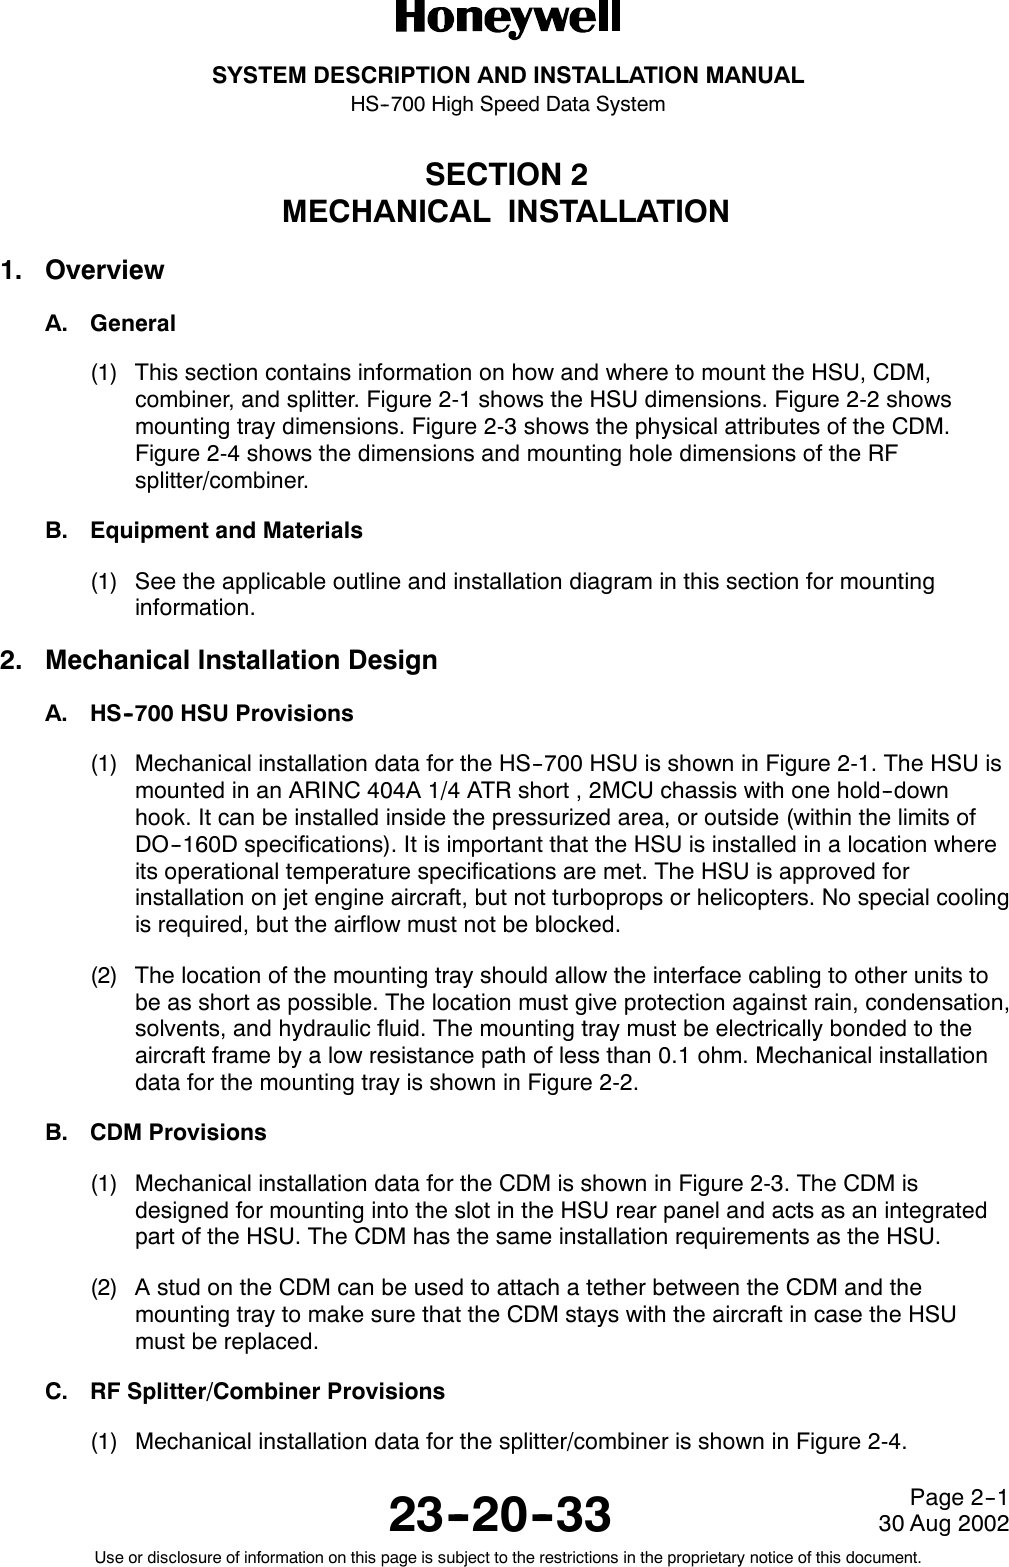 SYSTEM DESCRIPTION AND INSTALLATION MANUALHS--700 High Speed Data System23--20--3330 Aug 2002Use or disclosure of information on this page is subject to the restrictions in the proprietary notice of this document.Page 2--1SECTION 2MECHANICAL INSTALLATION1. OverviewA. General(1) This section contains information on how and where to mount the HSU, CDM,combiner, and splitter. Figure 2-1 shows the HSU dimensions. Figure 2-2 showsmounting tray dimensions. Figure 2-3 shows the physical attributes of the CDM.Figure 2-4 shows the dimensions and mounting hole dimensions of the RFsplitter/combiner.B. Equipment and Materials(1) See the applicable outline and installation diagram in this section for mountinginformation.2. Mechanical Installation DesignA. HS--700 HSU Provisions(1) Mechanical installation data for the HS--700 HSU is shown in Figure 2-1. The HSU ismounted in an ARINC 404A 1/4 ATR short , 2MCU chassis with one hold--downhook. It can be installed inside the pressurized area, or outside (within the limits ofDO--160D specifications). It is important that the HSU is installed in a location whereits operational temperature specifications are met. The HSU is approved forinstallation on jet engine aircraft, but not turboprops or helicopters. No special coolingis required, but the airflow must not be blocked.(2) The location of the mounting tray should allow the interface cabling to other units tobe as short as possible. The location must give protection against rain, condensation,solvents, and hydraulic fluid. The mounting tray must be electrically bonded to theaircraft frame by a low resistance path of less than 0.1 ohm. Mechanical installationdata for the mounting tray is shown in Figure 2-2.B. CDM Provisions(1) Mechanical installation data for the CDM is shown in Figure 2-3. The CDM isdesigned for mounting into the slot in the HSU rear panel and acts as an integratedpart of the HSU. The CDM has the same installation requirements as the HSU.(2) AstudontheCDMcanbeusedtoattachatetherbetweentheCDMandthemounting tray to make sure that the CDM stays with the aircraft in case the HSUmust be replaced.C. RF Splitter/Combiner Provisions(1) Mechanical installation data for the splitter/combiner is shown in Figure 2-4.